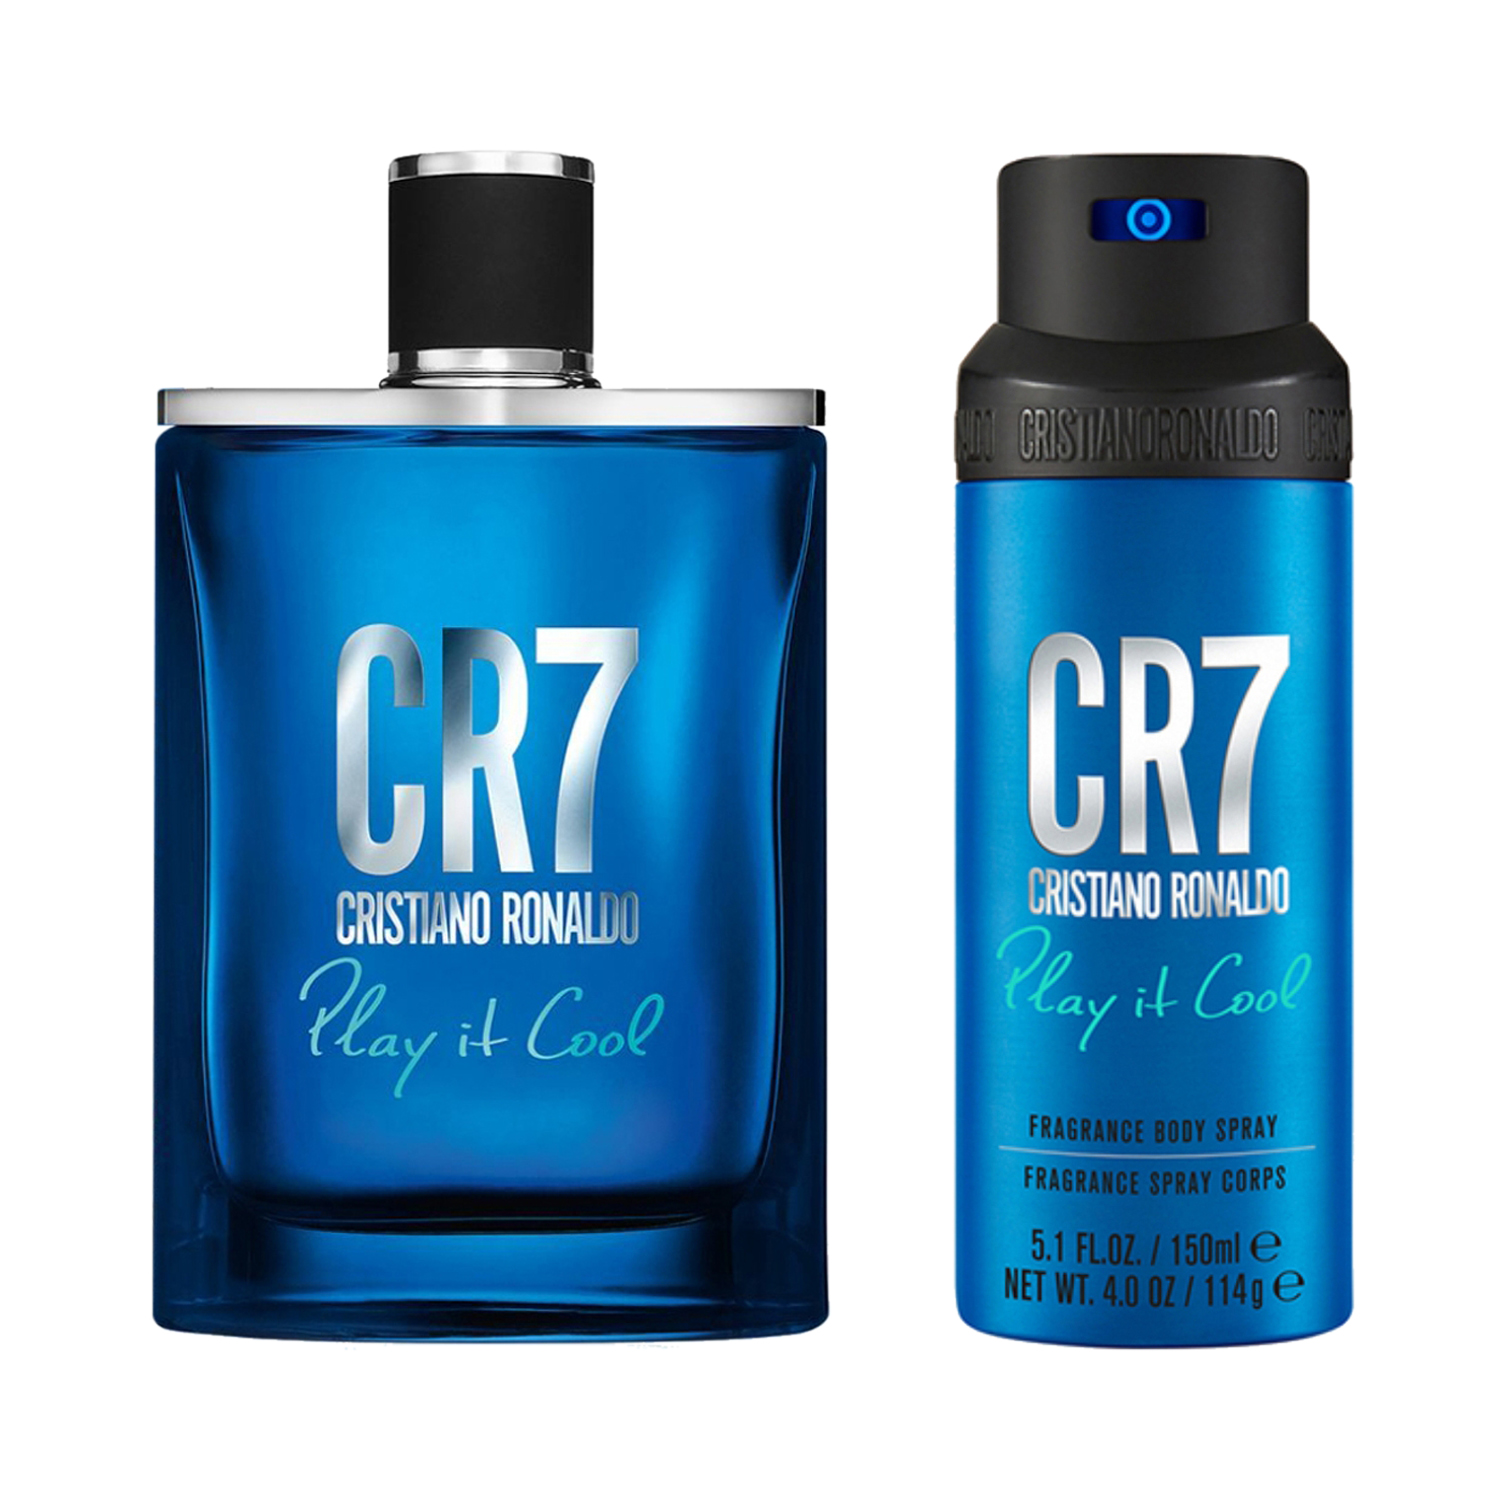 Cristiano Ronaldo CR7 PLAY IT COOL EDT + Body Spray (Pack of 2) Combo